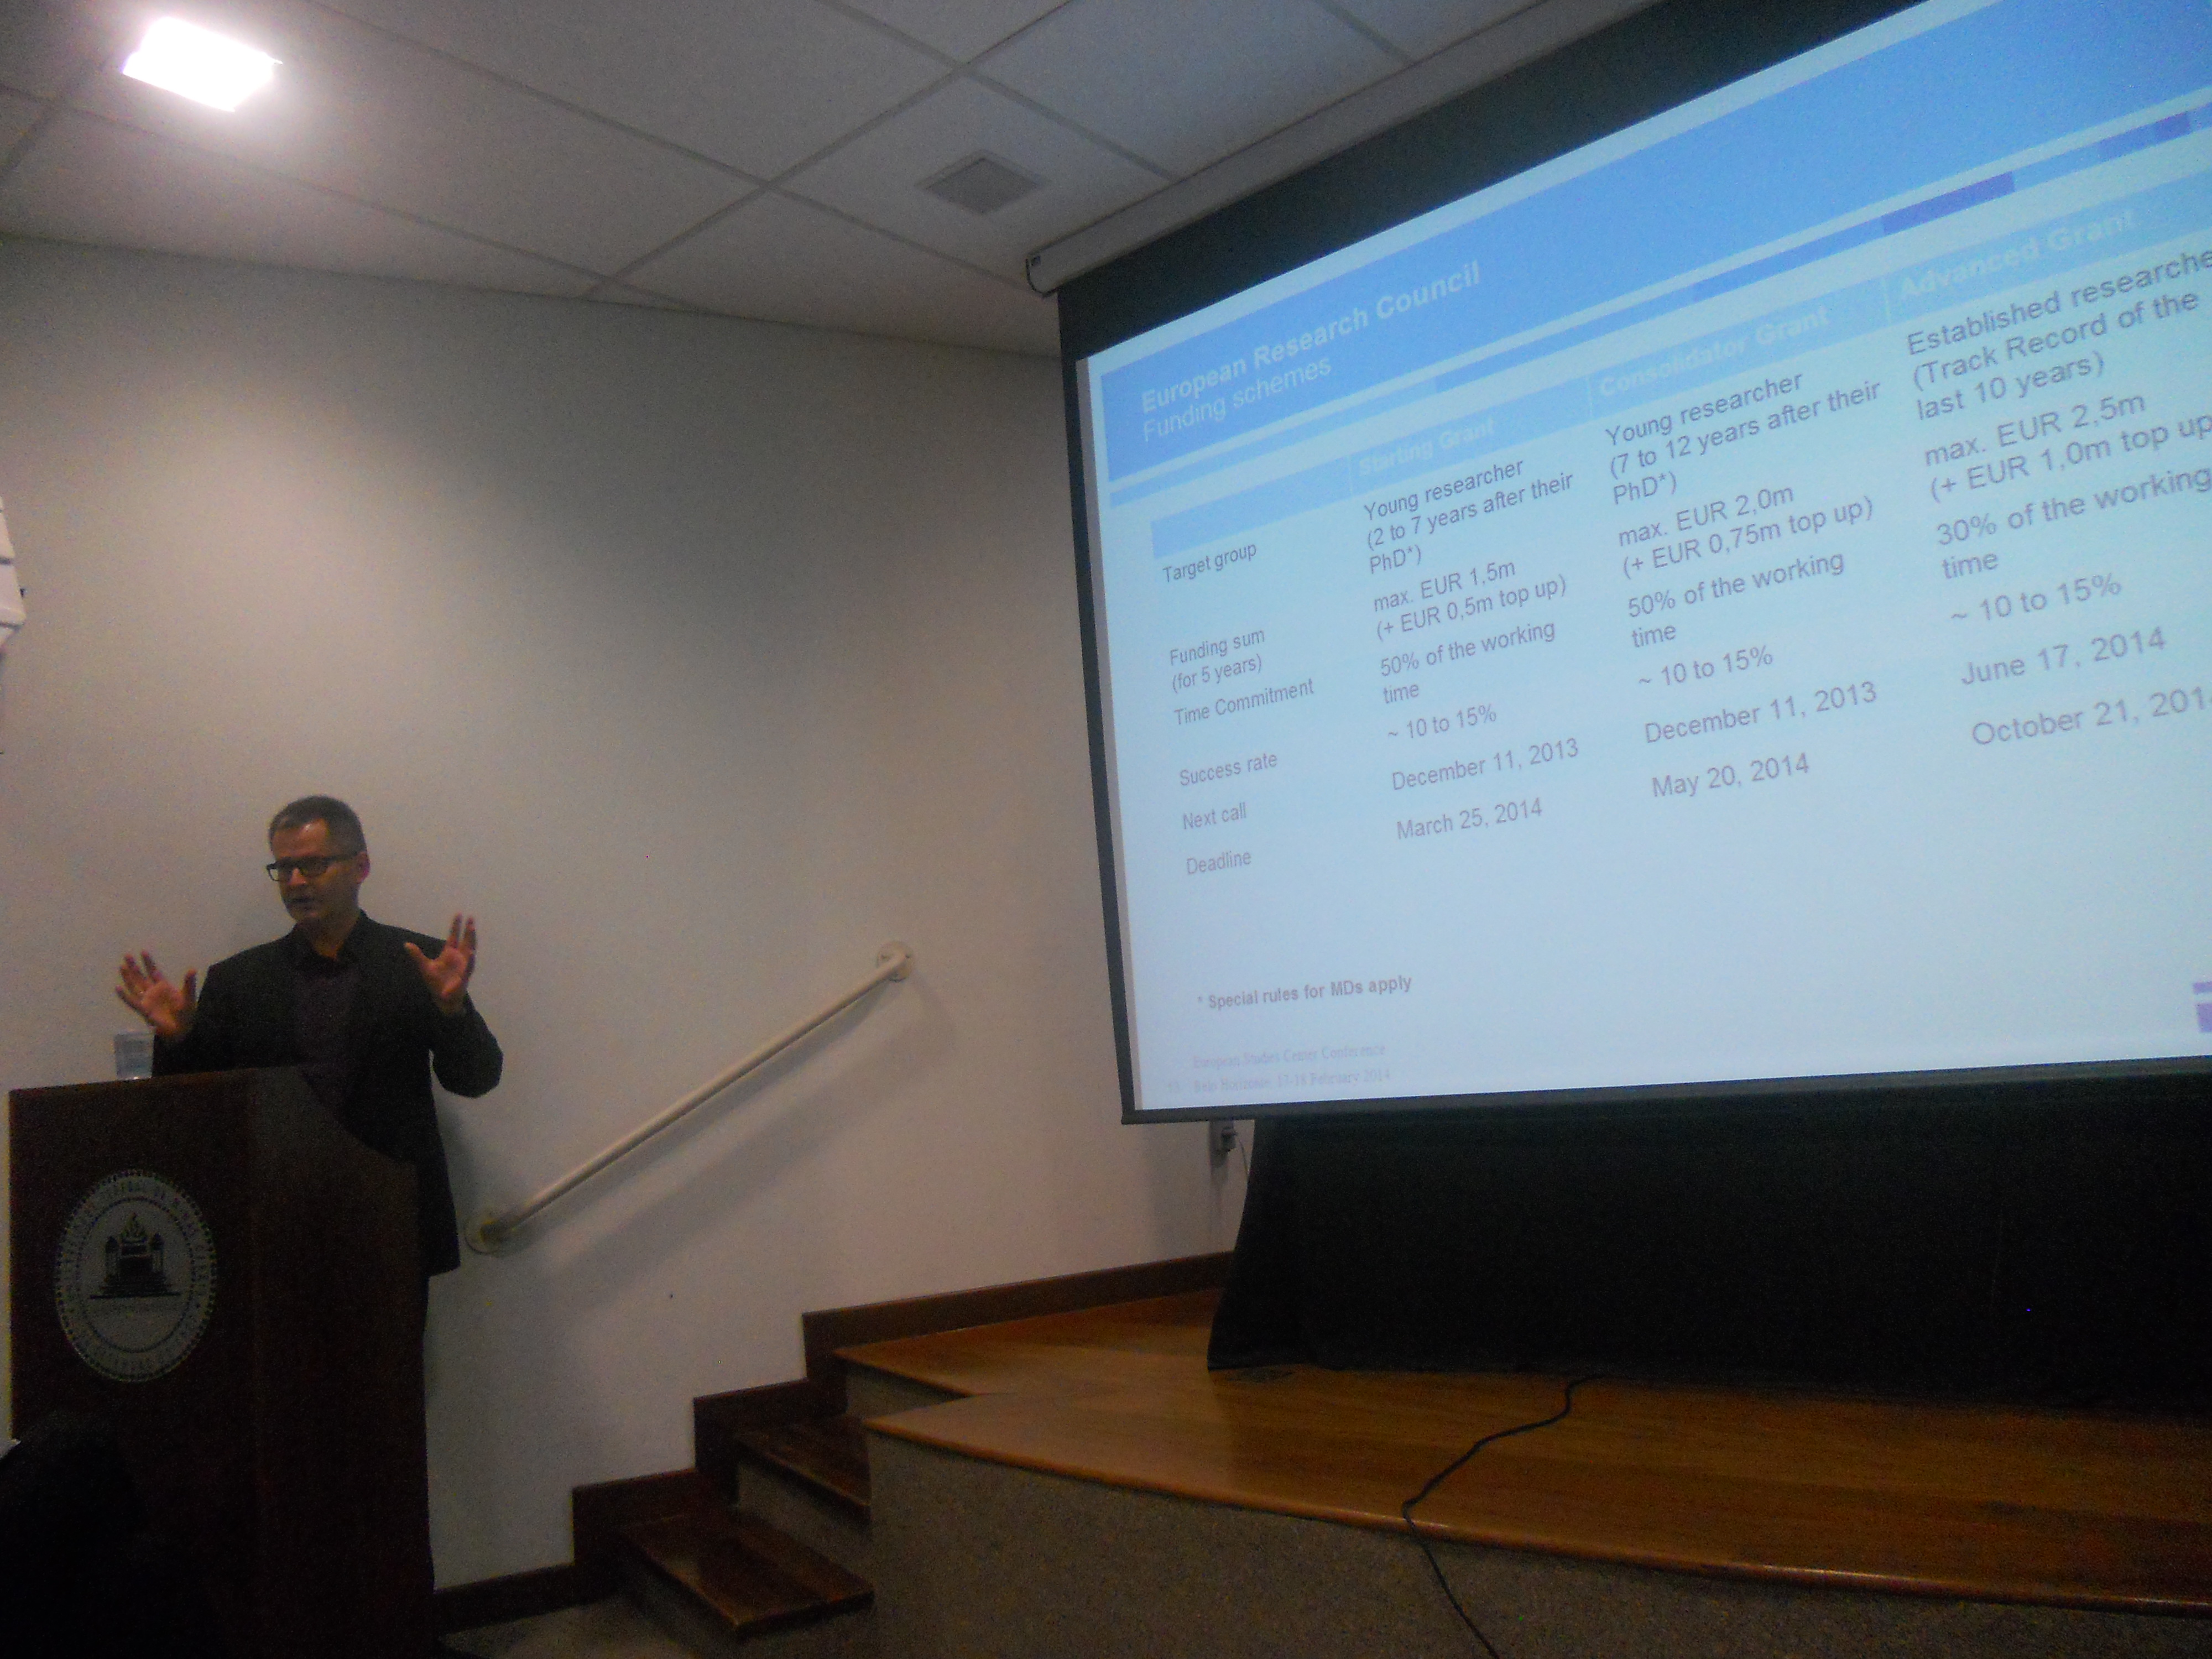 Presentation on DFG and ERC funding programmes at the European Studies Conference at UFMG